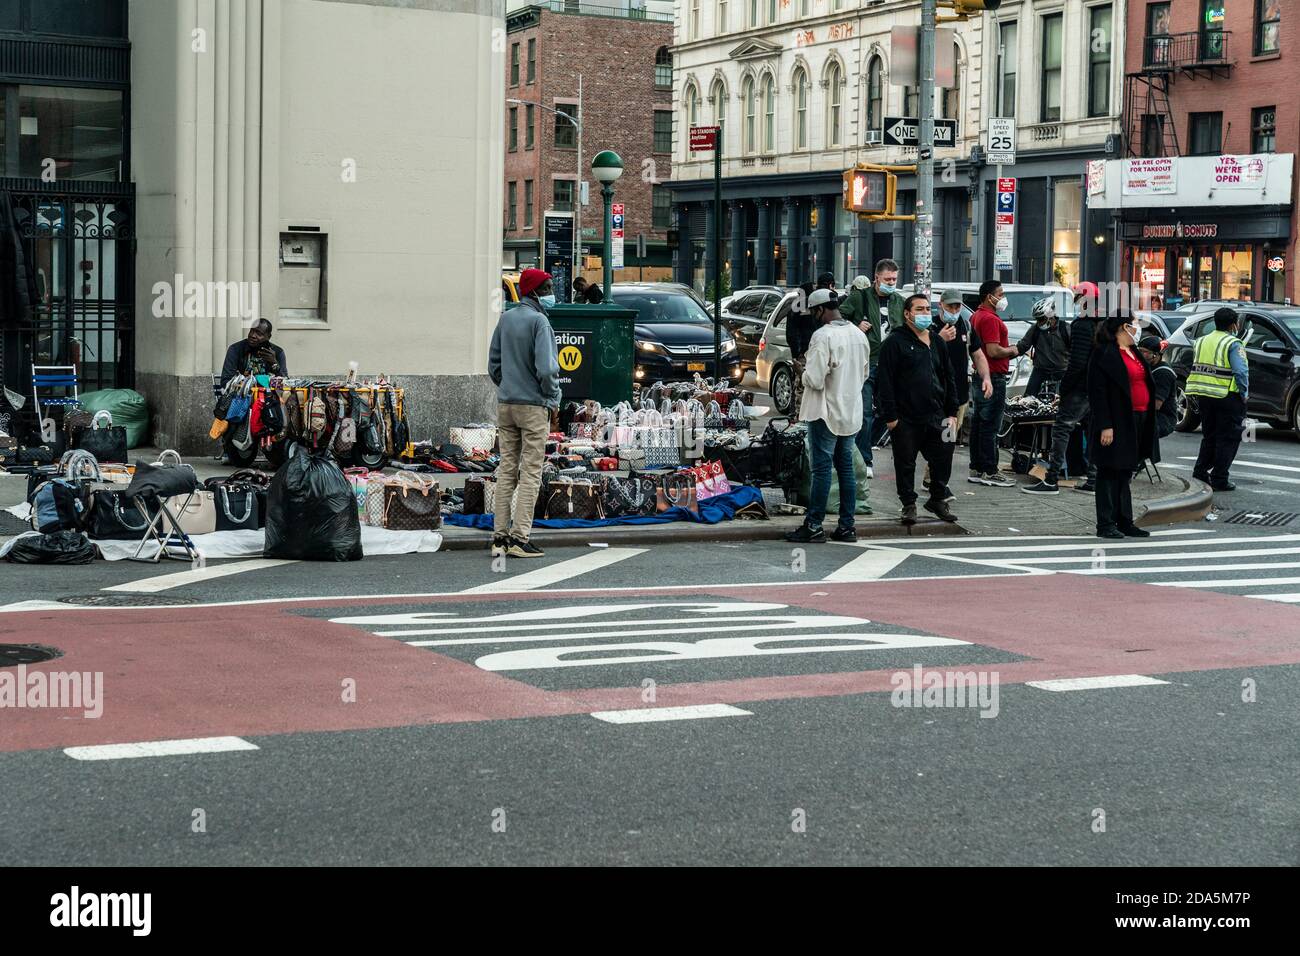 New York, NY - November 9, 2020: Street vendors sell counterfeits goods like bags, sunglasses, belts and watches on Canal street and Broadway corners Stock Photo